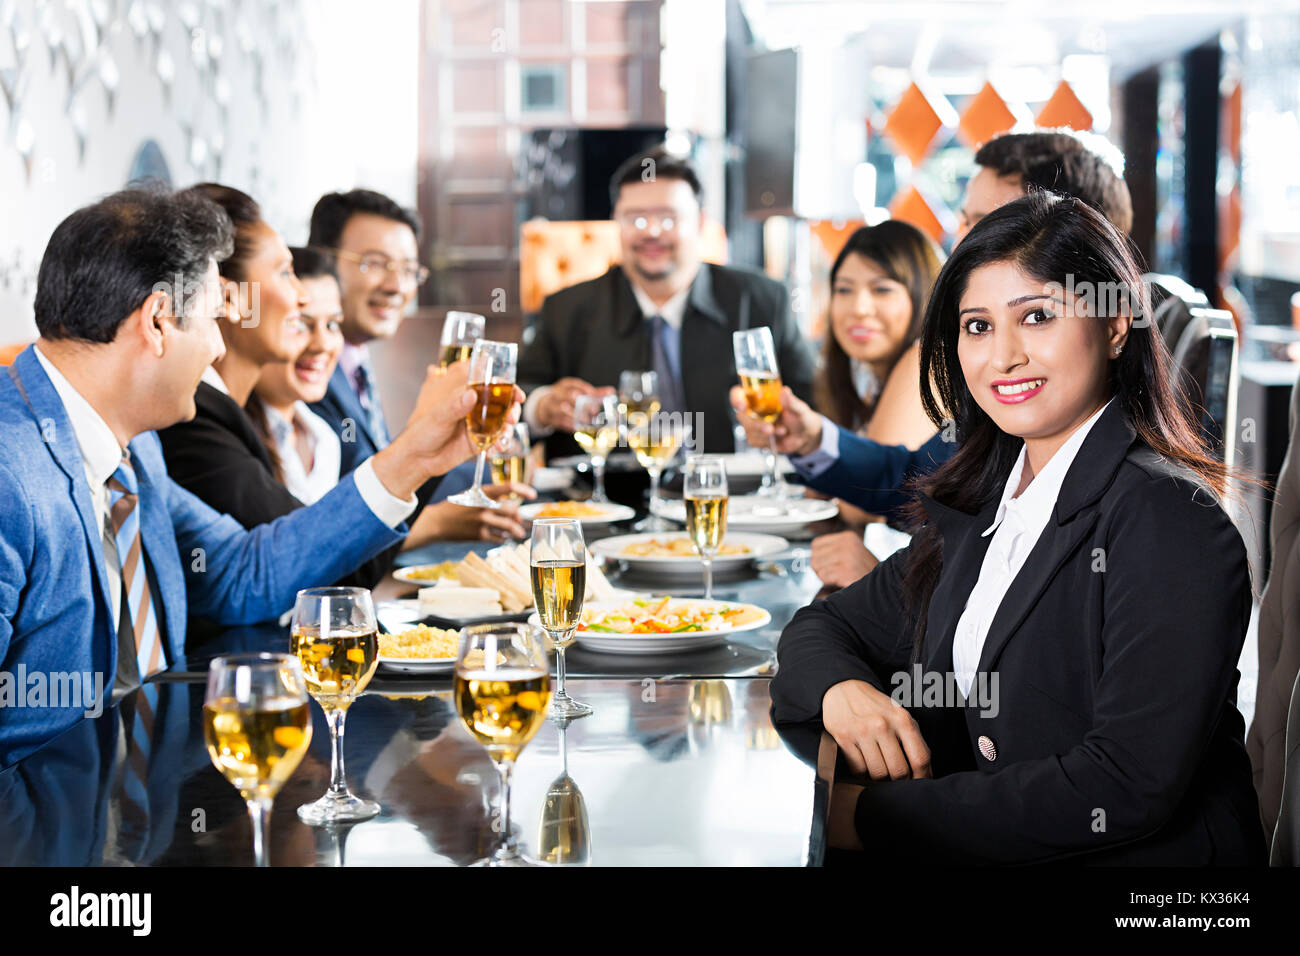 Group Business People Partners Sitting Dining Table Dinner Party Restaurant Stock Photo